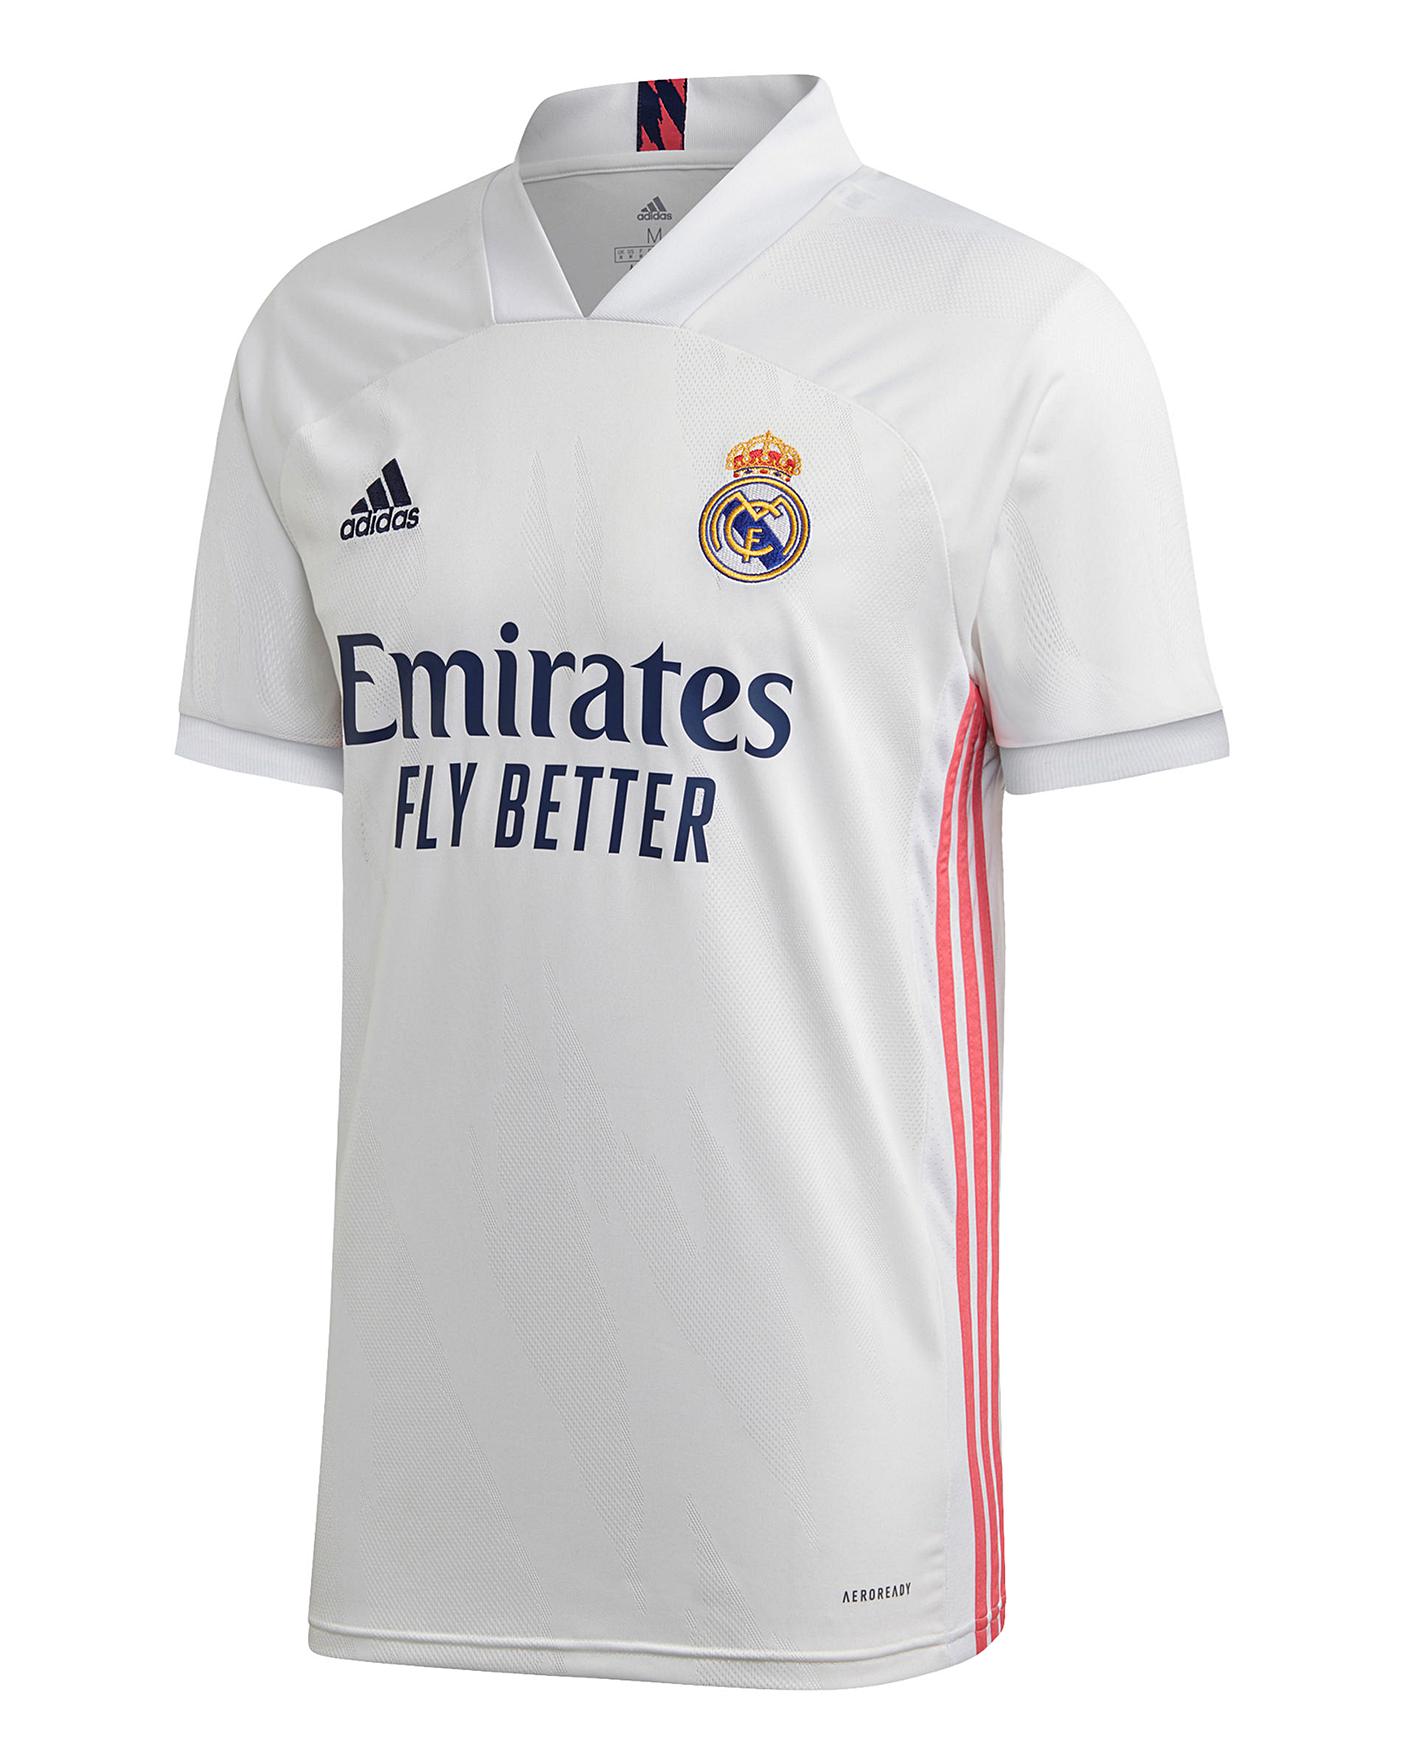 real madrid fc jersey 2020